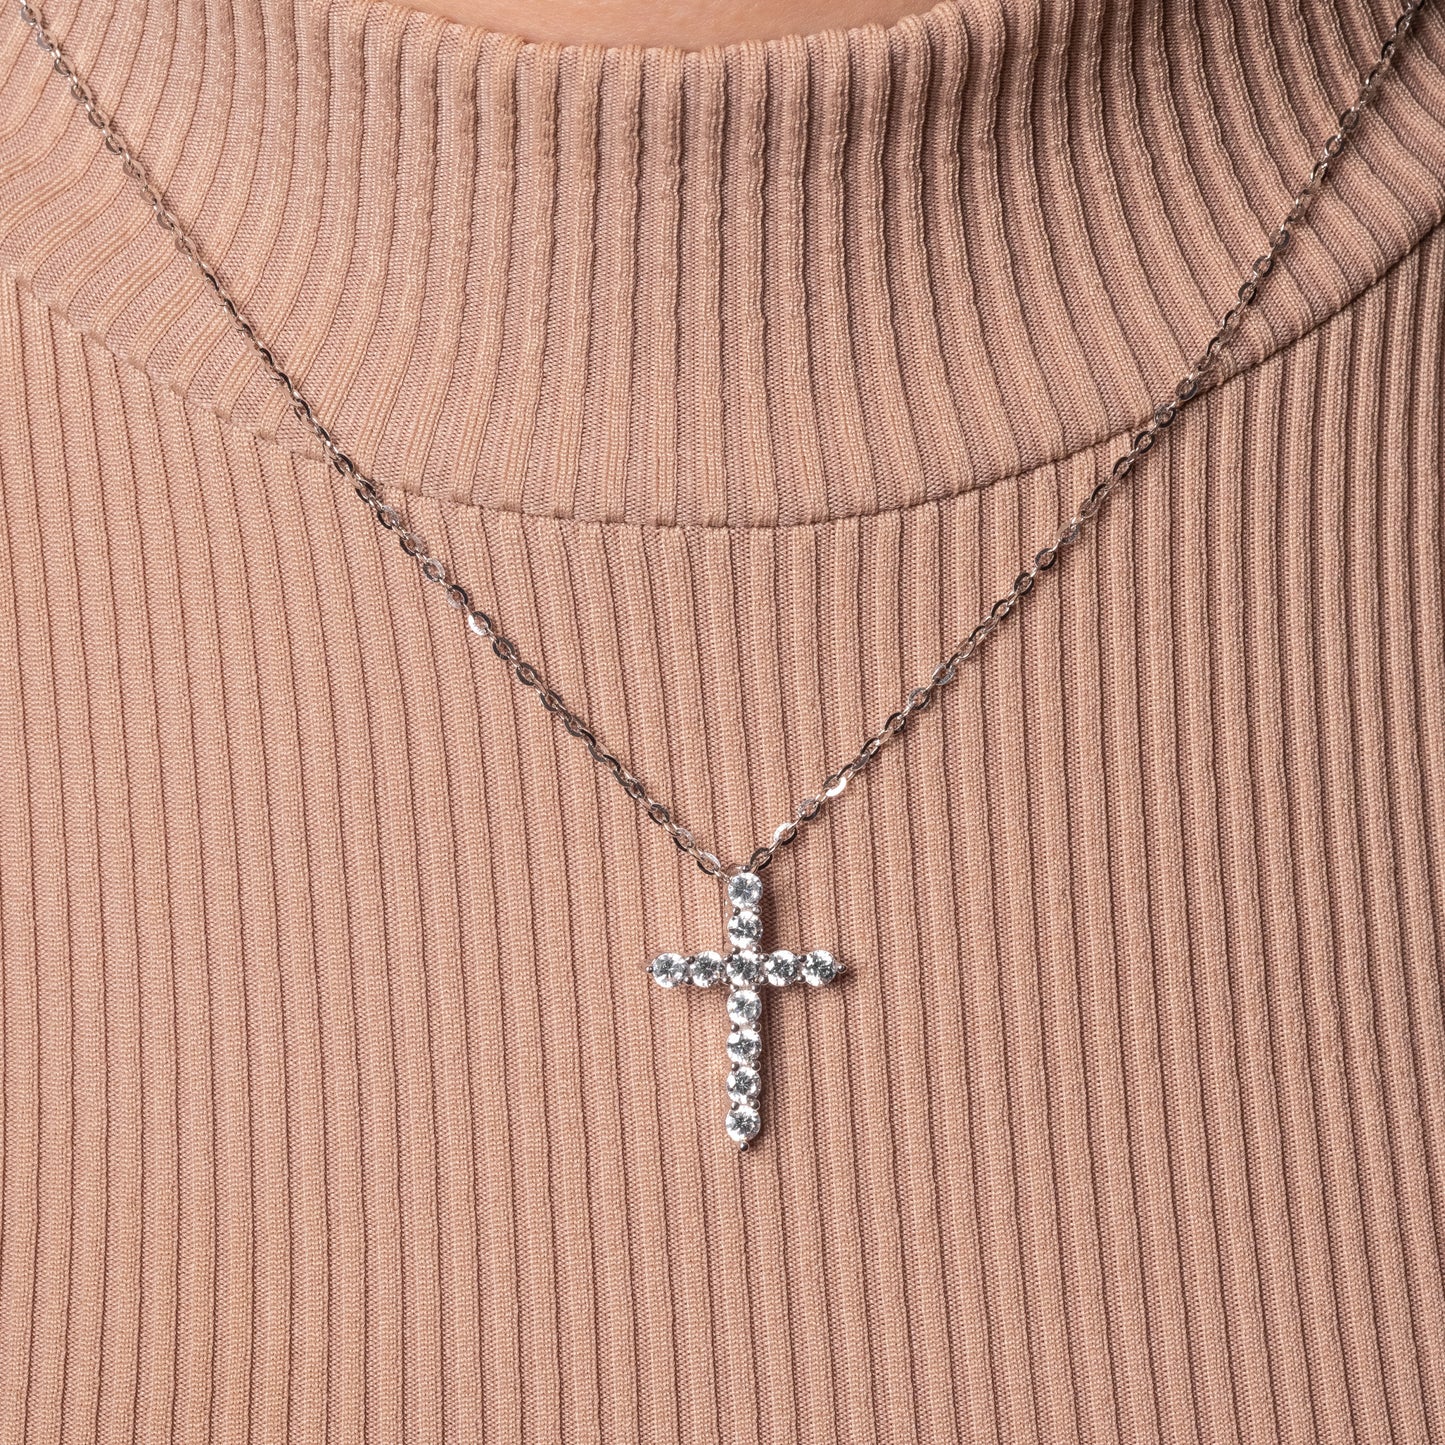 Iced Cross Pendant paired with Flat Cable necklace on the model. Zoomed.